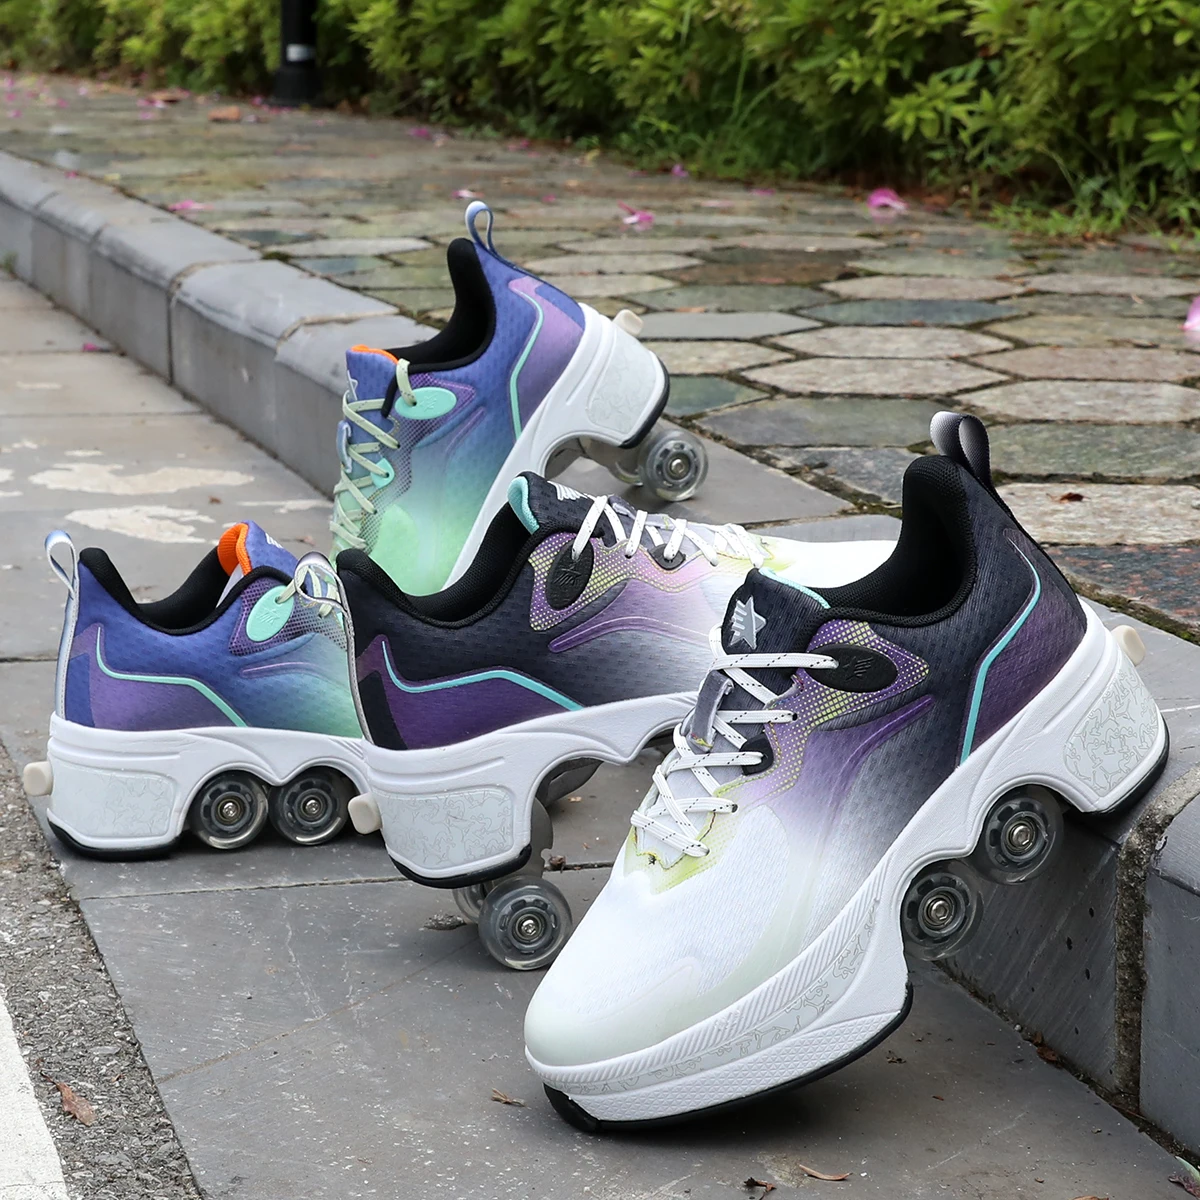 Deform Roller Skates With 4 Wheels Child Youth Deformation Shoes Fashion Parkour Sneakers For Kids Rounds Children Of Running